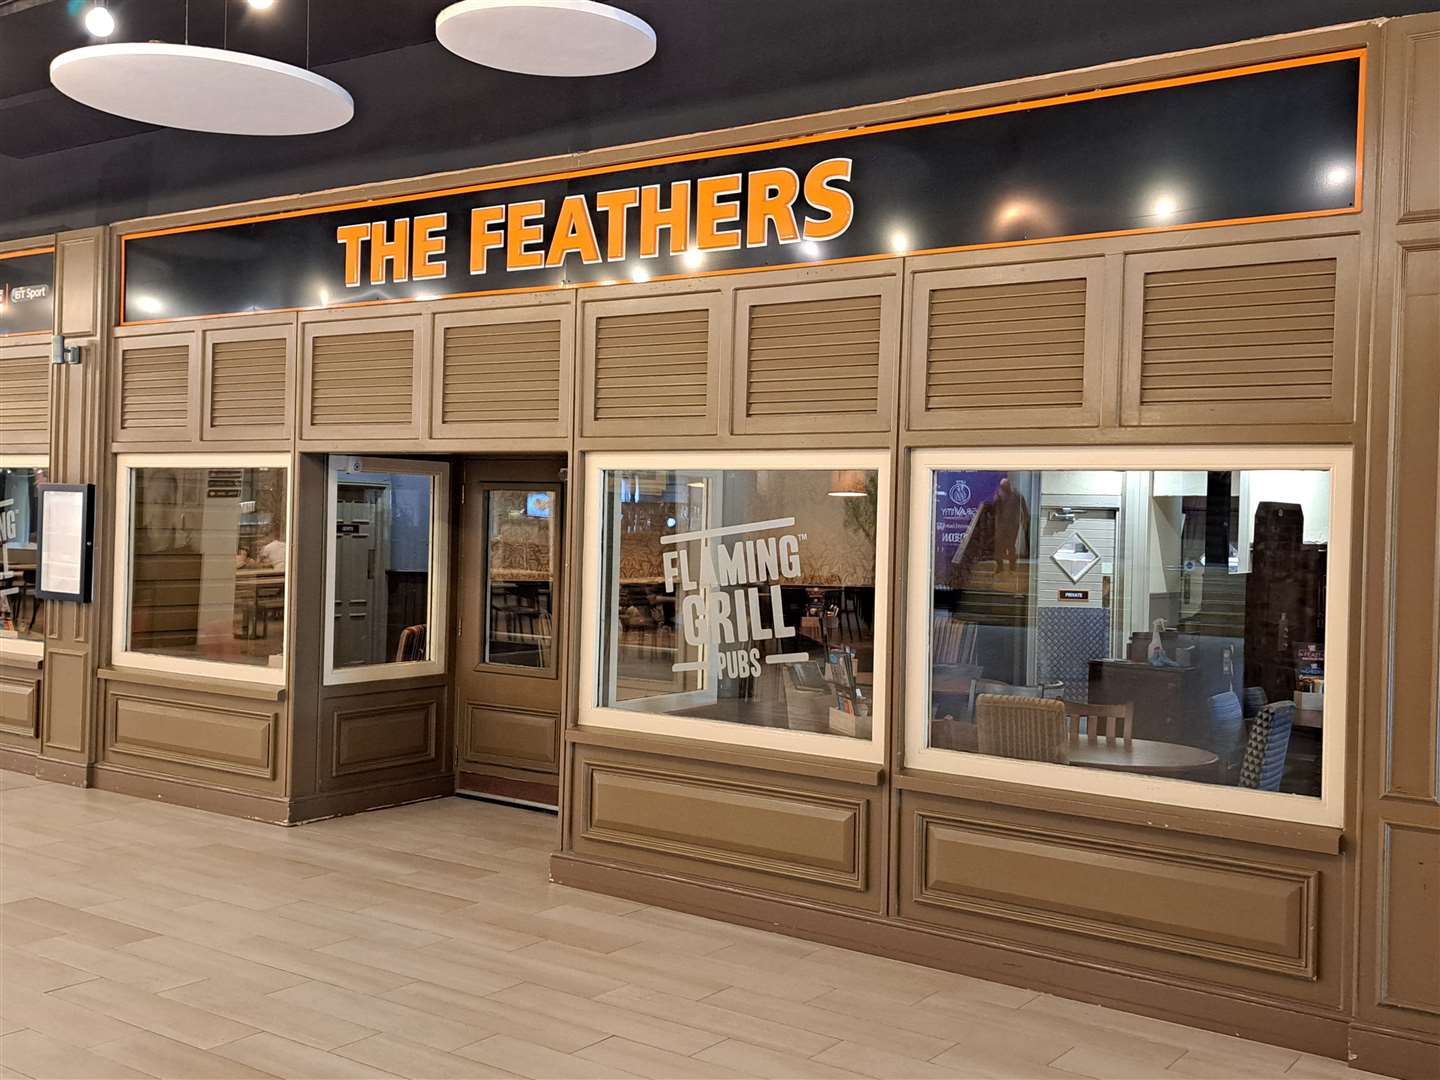 The Feathers bar is closing